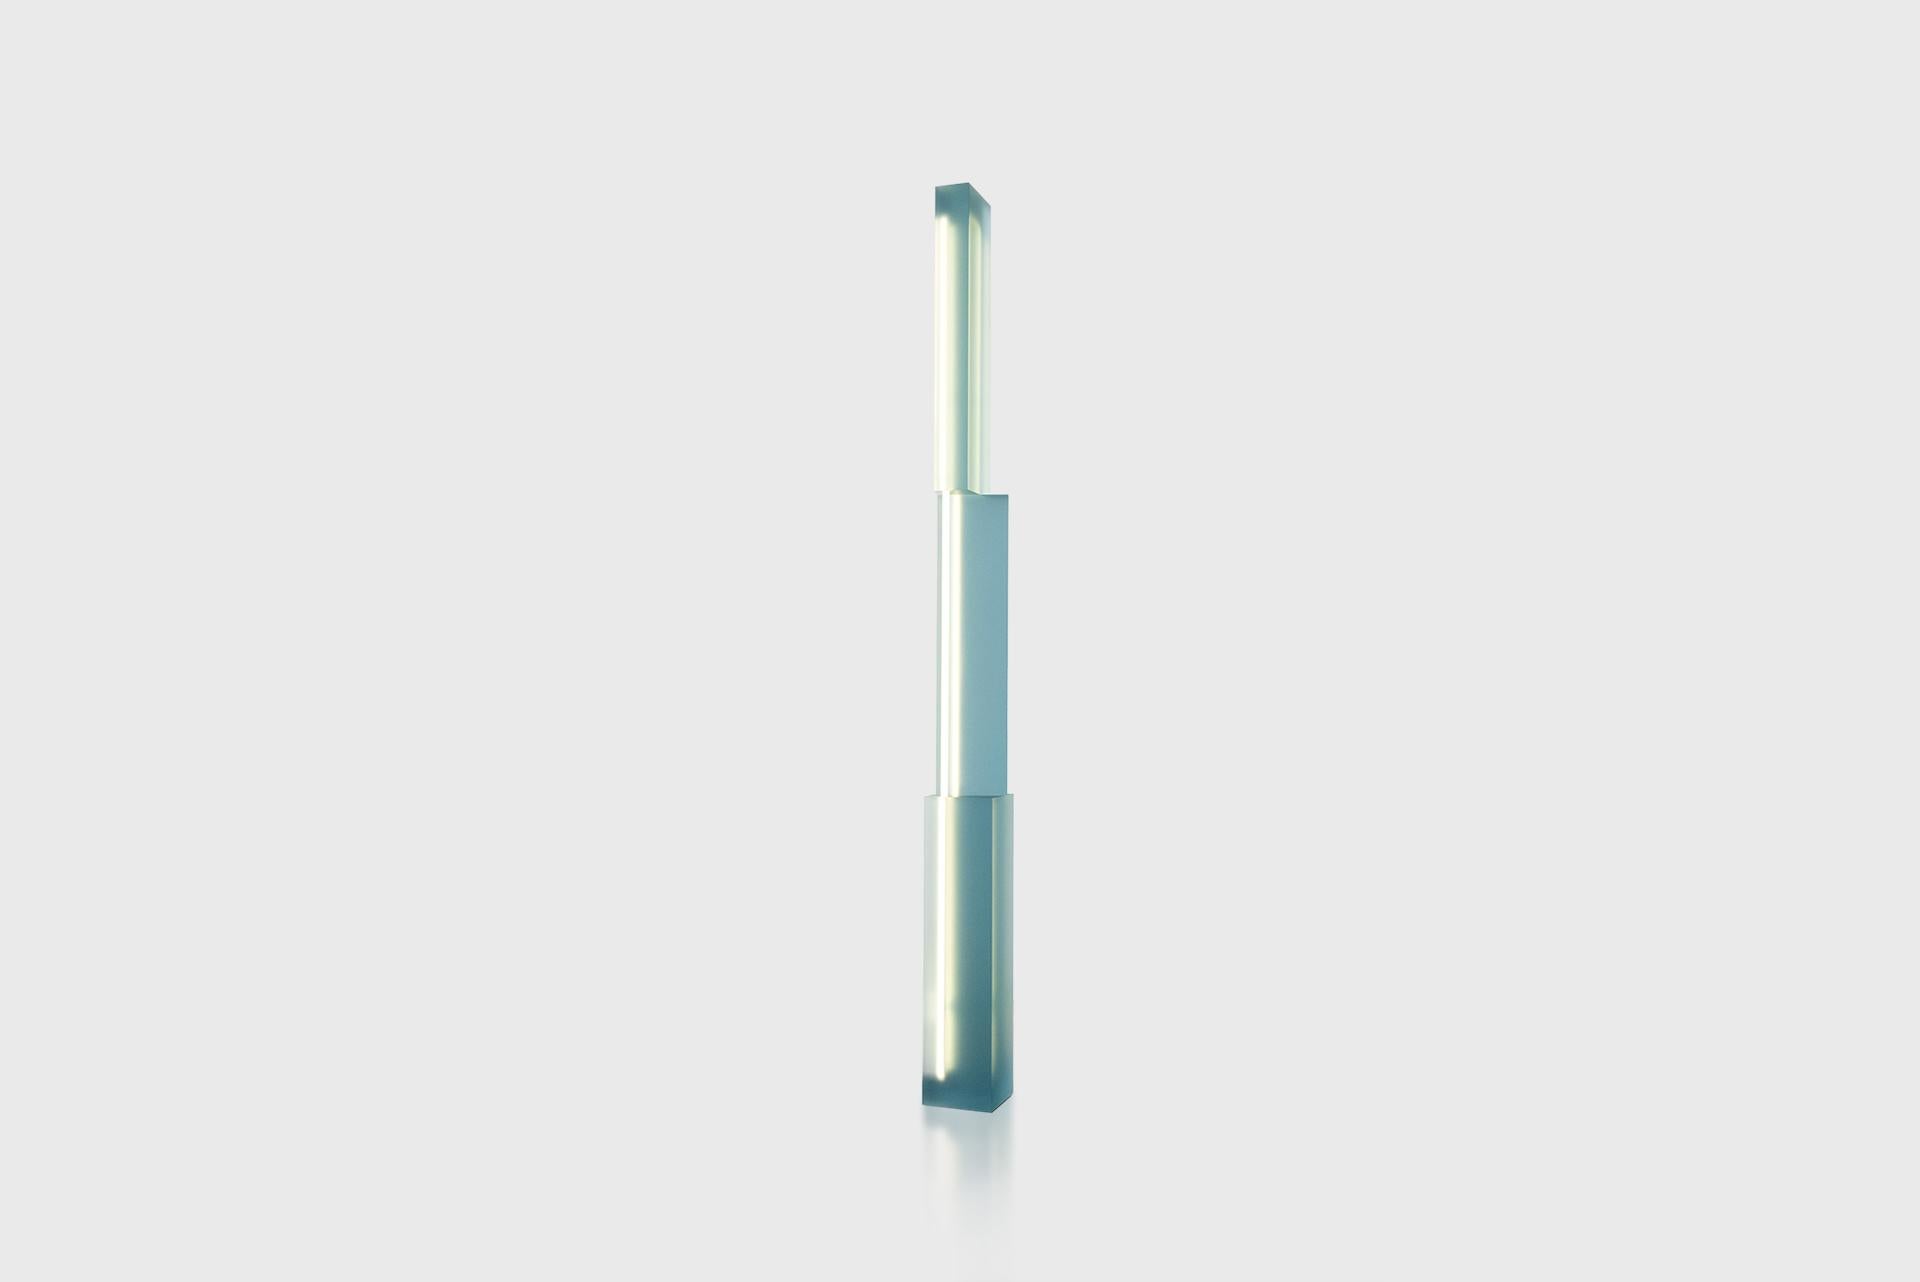 Floor lamp model “Totem”
Manufactured by Sabine Marcelis
Produced in exclusive for SIDE GALLERY
Rotterdam, The Netherlands 2021
Resin, Neon (+transformer)

Measurements
18 cm x 17 cm x 190h cm
7,08 in x 6,69 in x 74h in

Edition
Limited